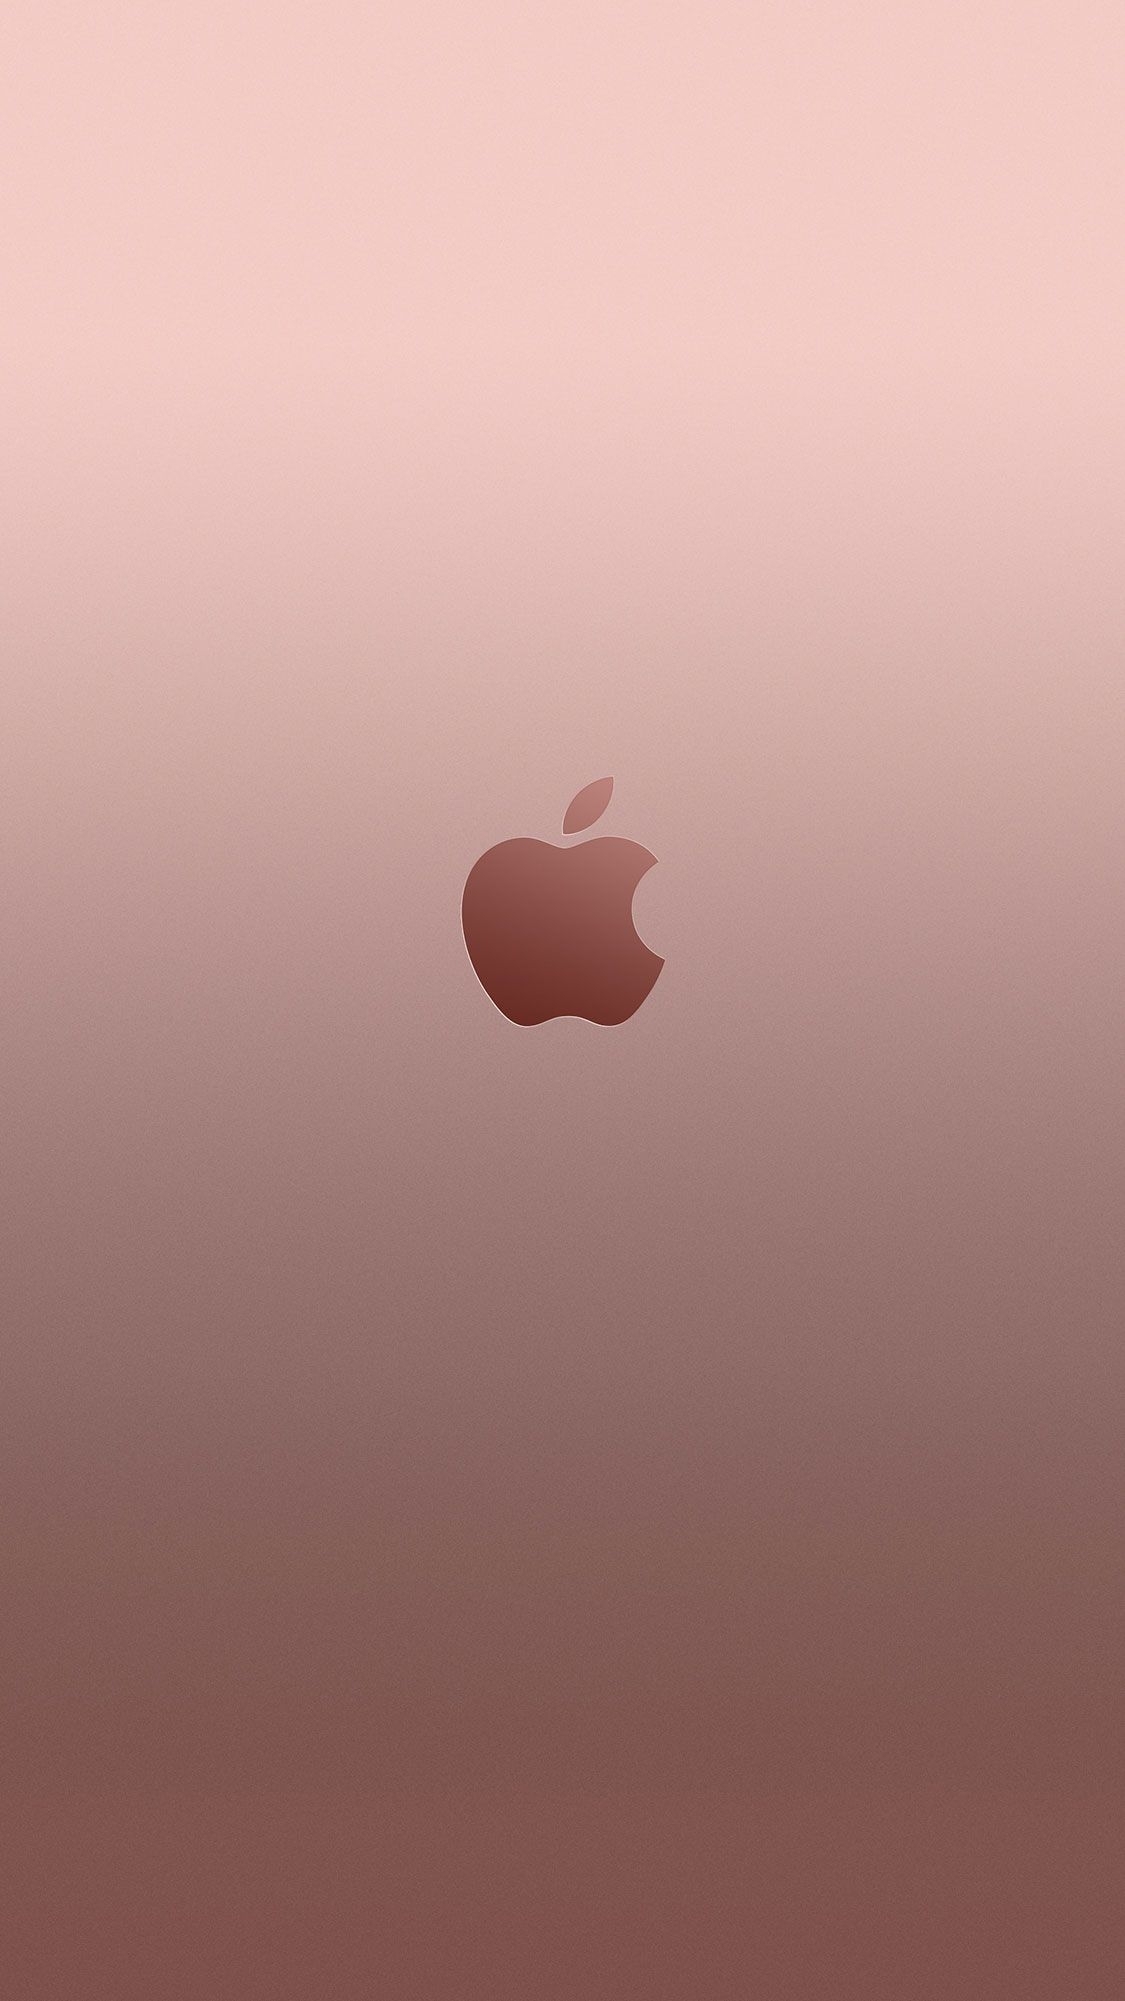 10 Top Rose Gold Iphone 6 Wallpaper FULL HD 1080p For PC Background